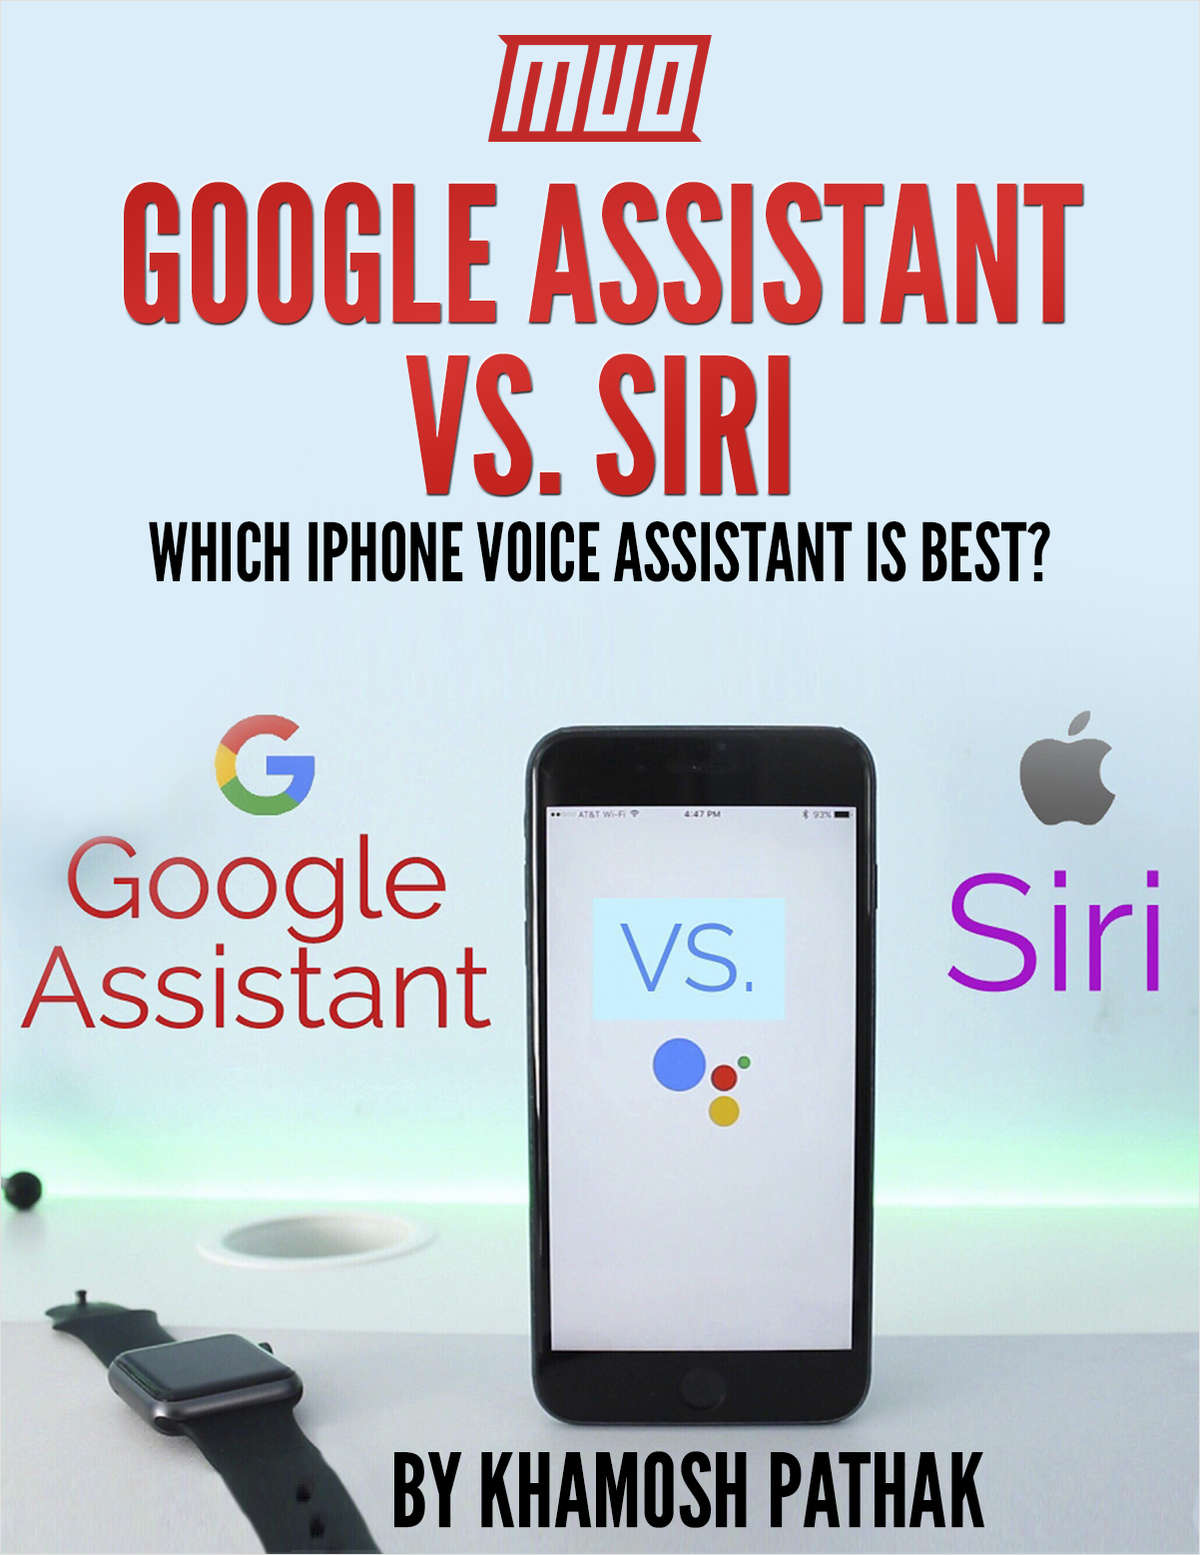 Google Assistant vs. Siri - Which iPhone Voice Assistant Is Best?